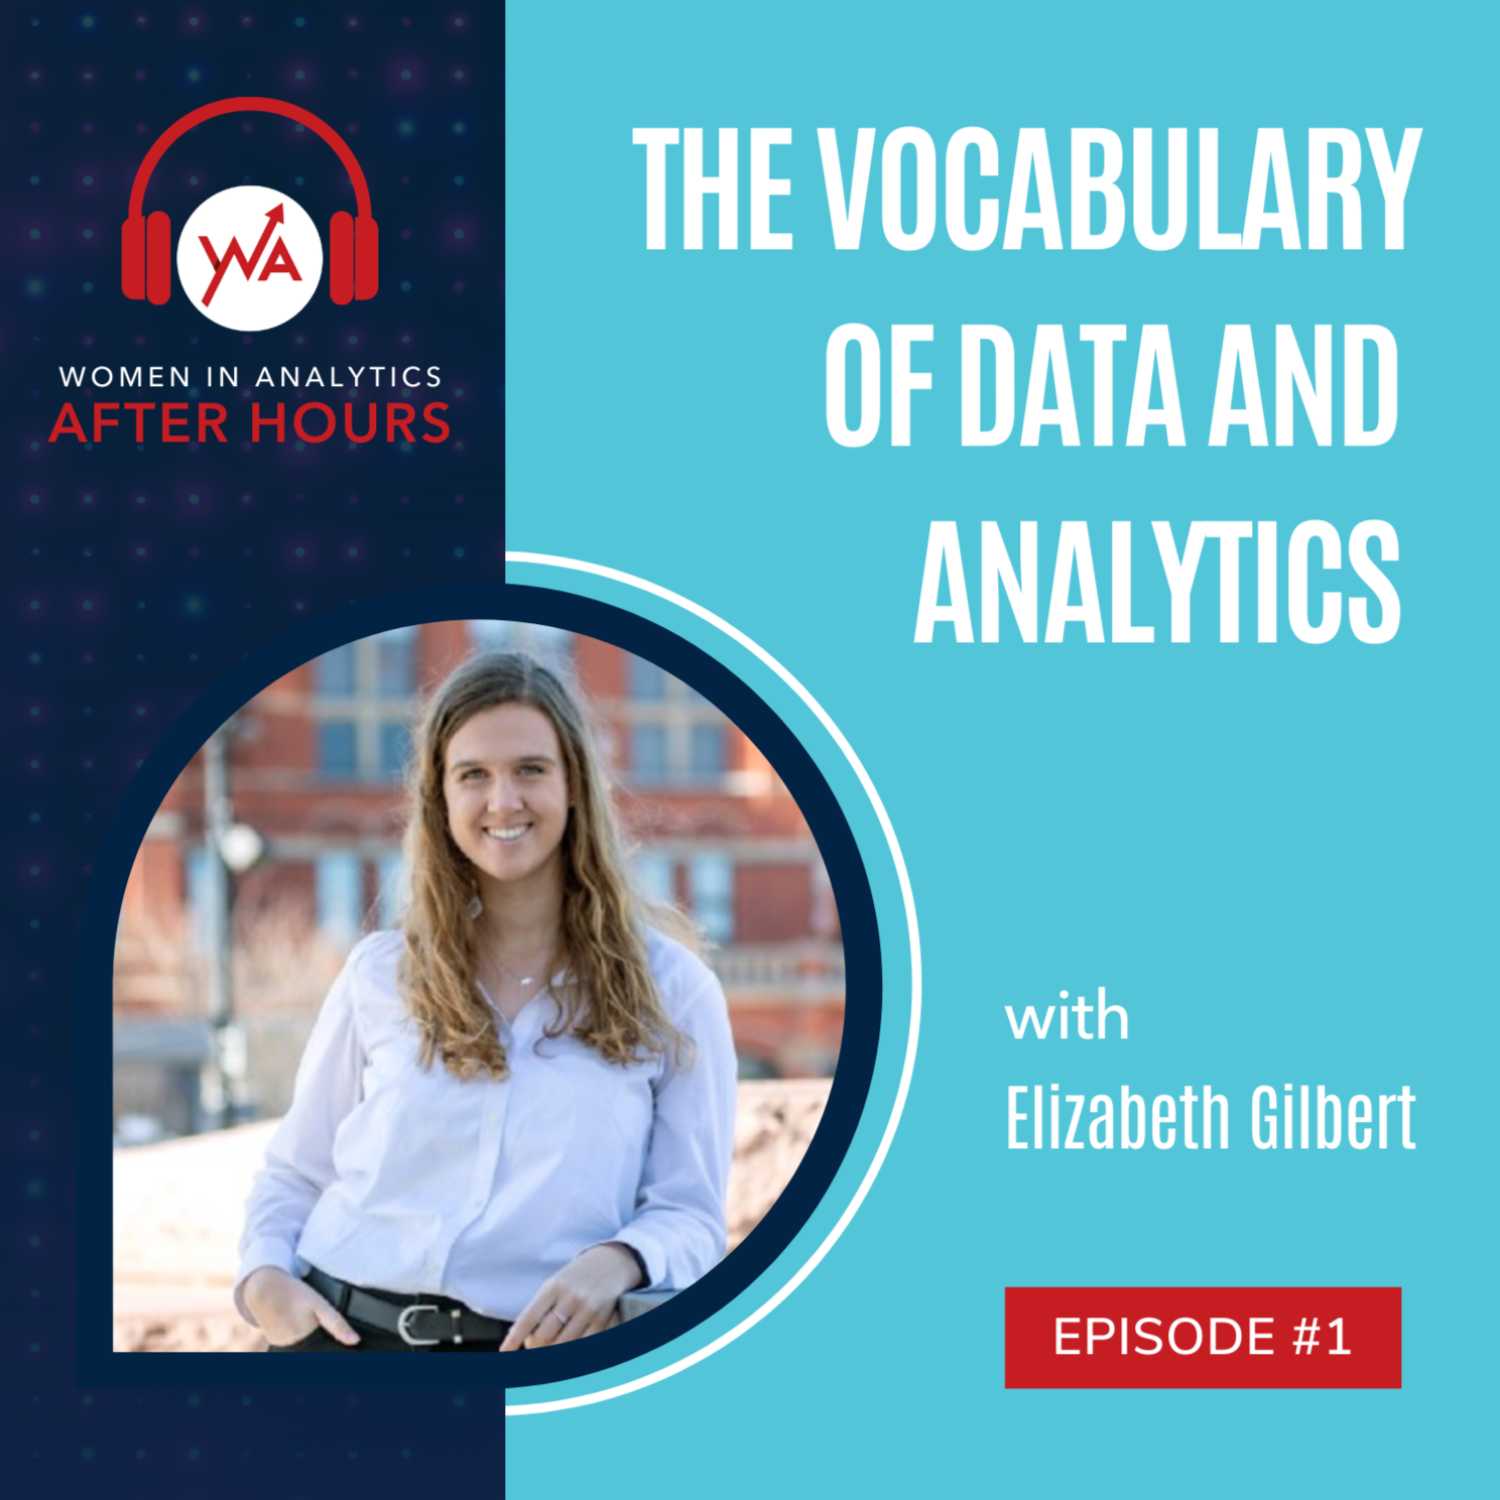 Episode 1 - The Vocabulary of Data and Analytics with Elizabeth Gilbert